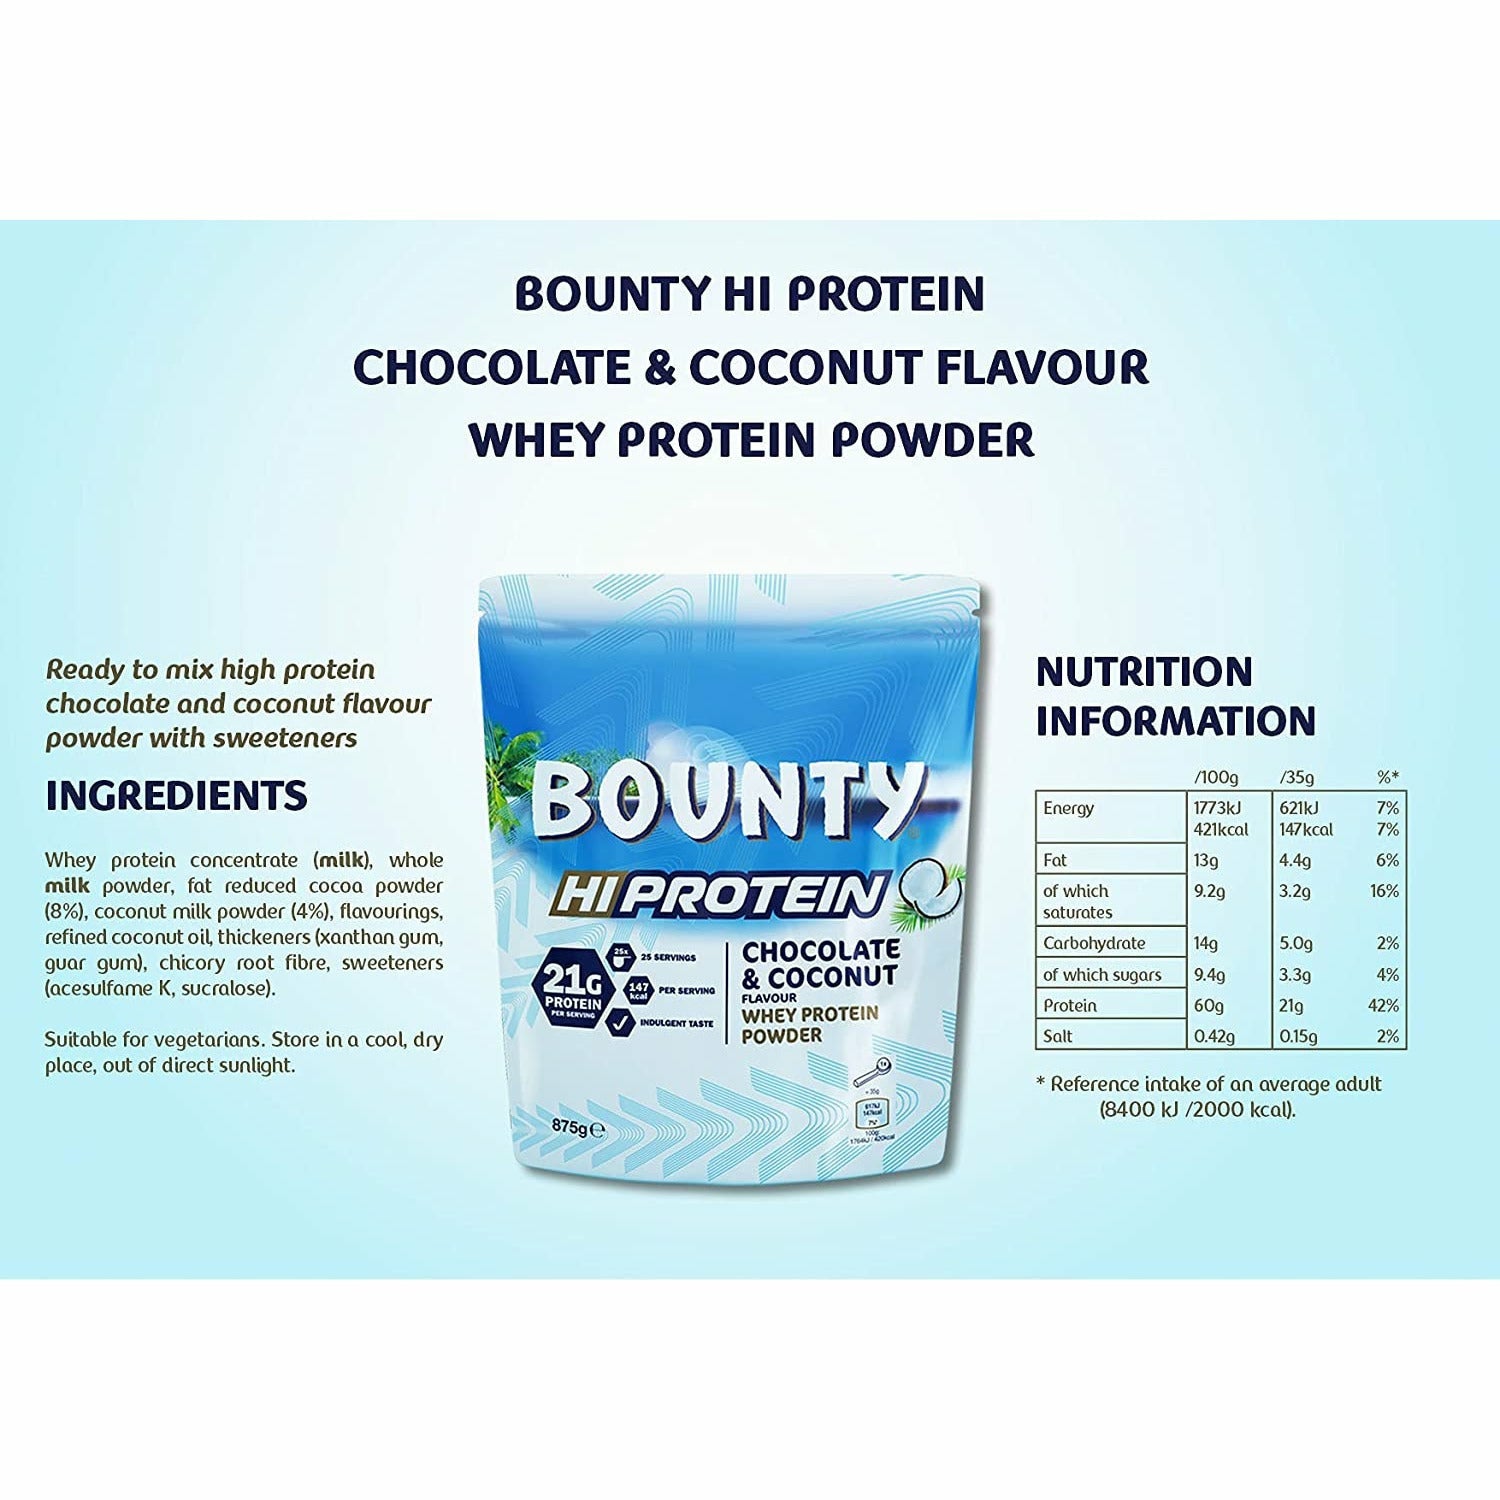 MARS Brand Hi Protein Whey Protein Powder 25 servings HiProtein Top Nutrition Canada